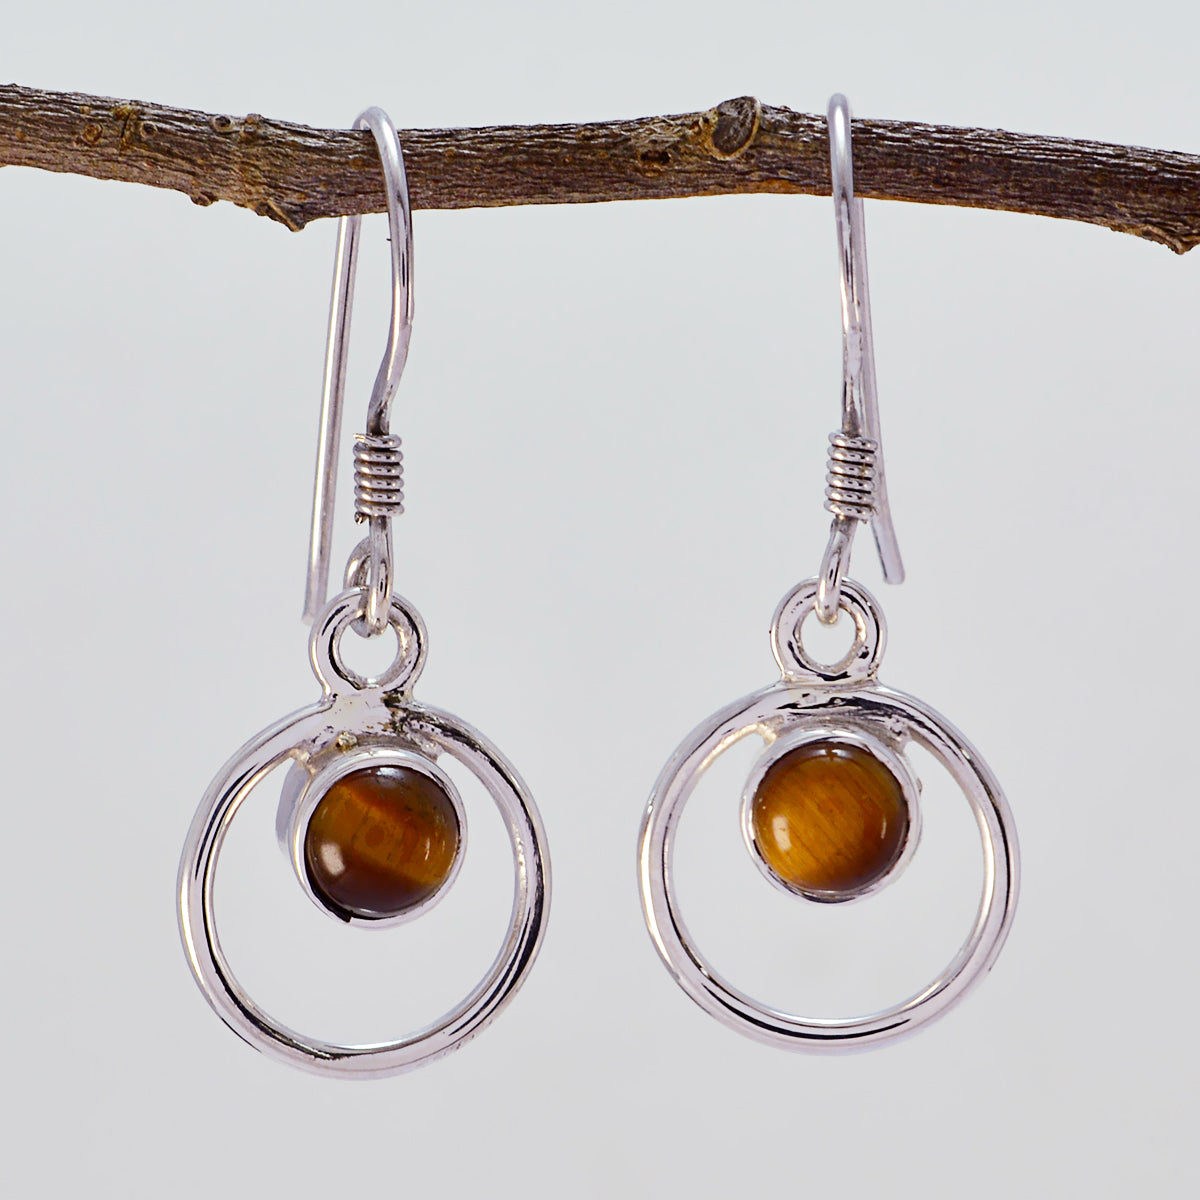 Riyo Good Gemstones round Cabochon Brown Tiger Eye Silver Earrings gift for mothers day